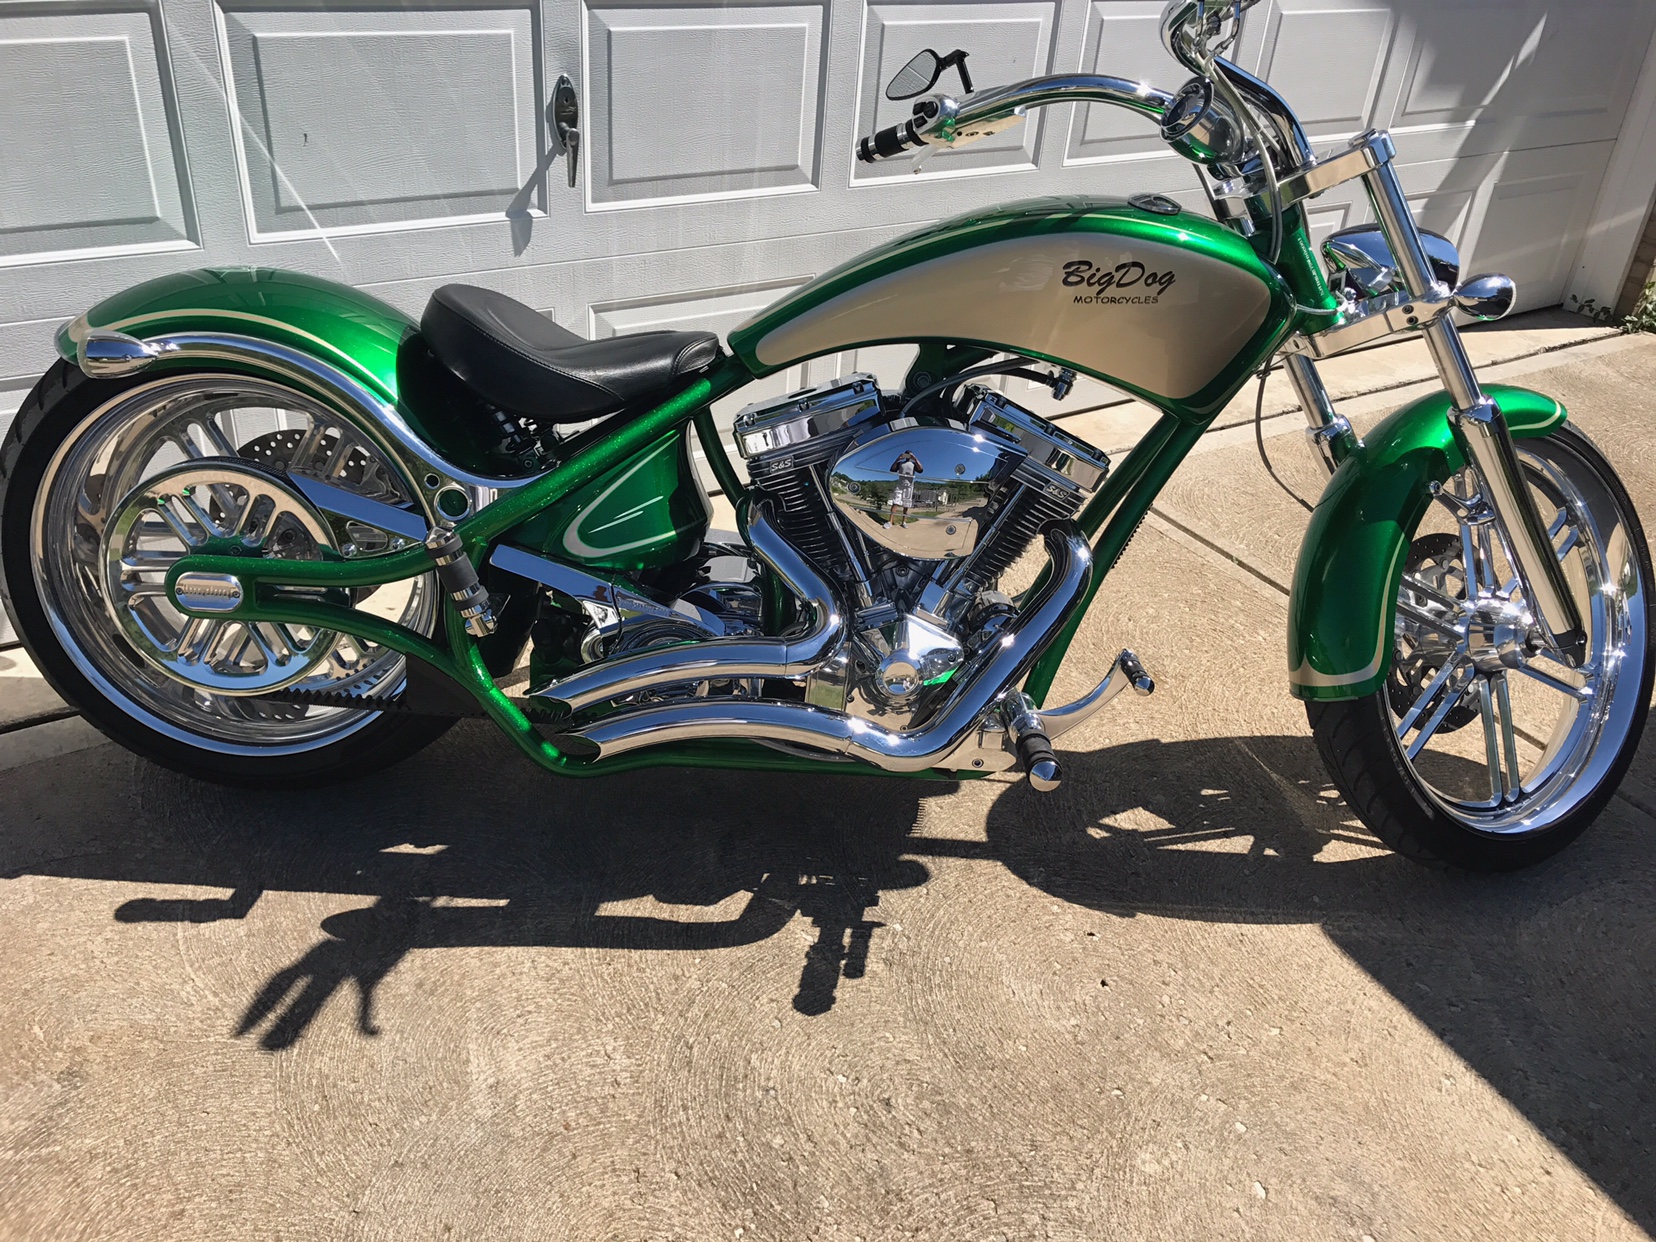 Paul Yaffee Pipes on Craigslist - St. Louis | Page 2 | Big Dog Motorcycles Forum